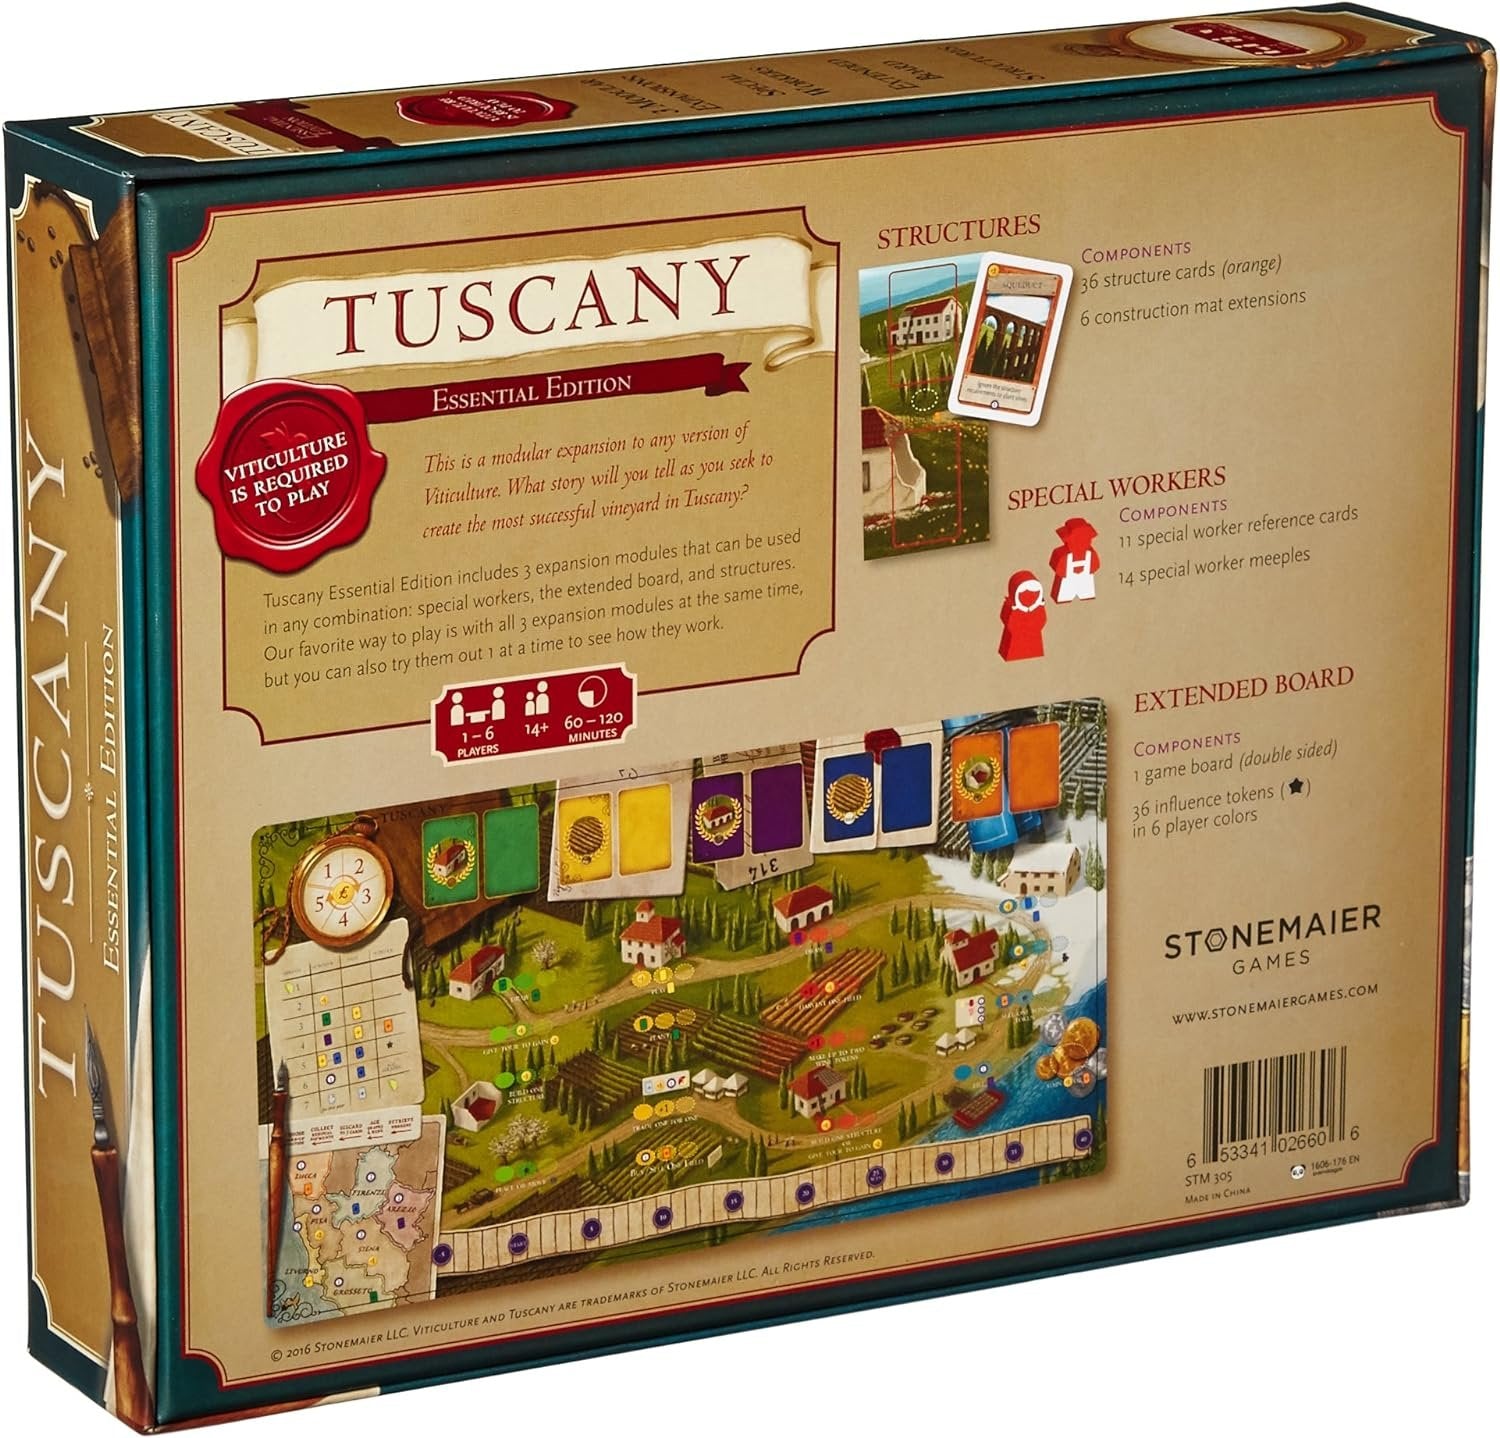 Stonemaier Games: Tuscany, Essential Edition, Features 3 Expansions to Viticulture, Includes The Extended Boards, 1 to 6 Players, 60 to 150 Minute Play Time